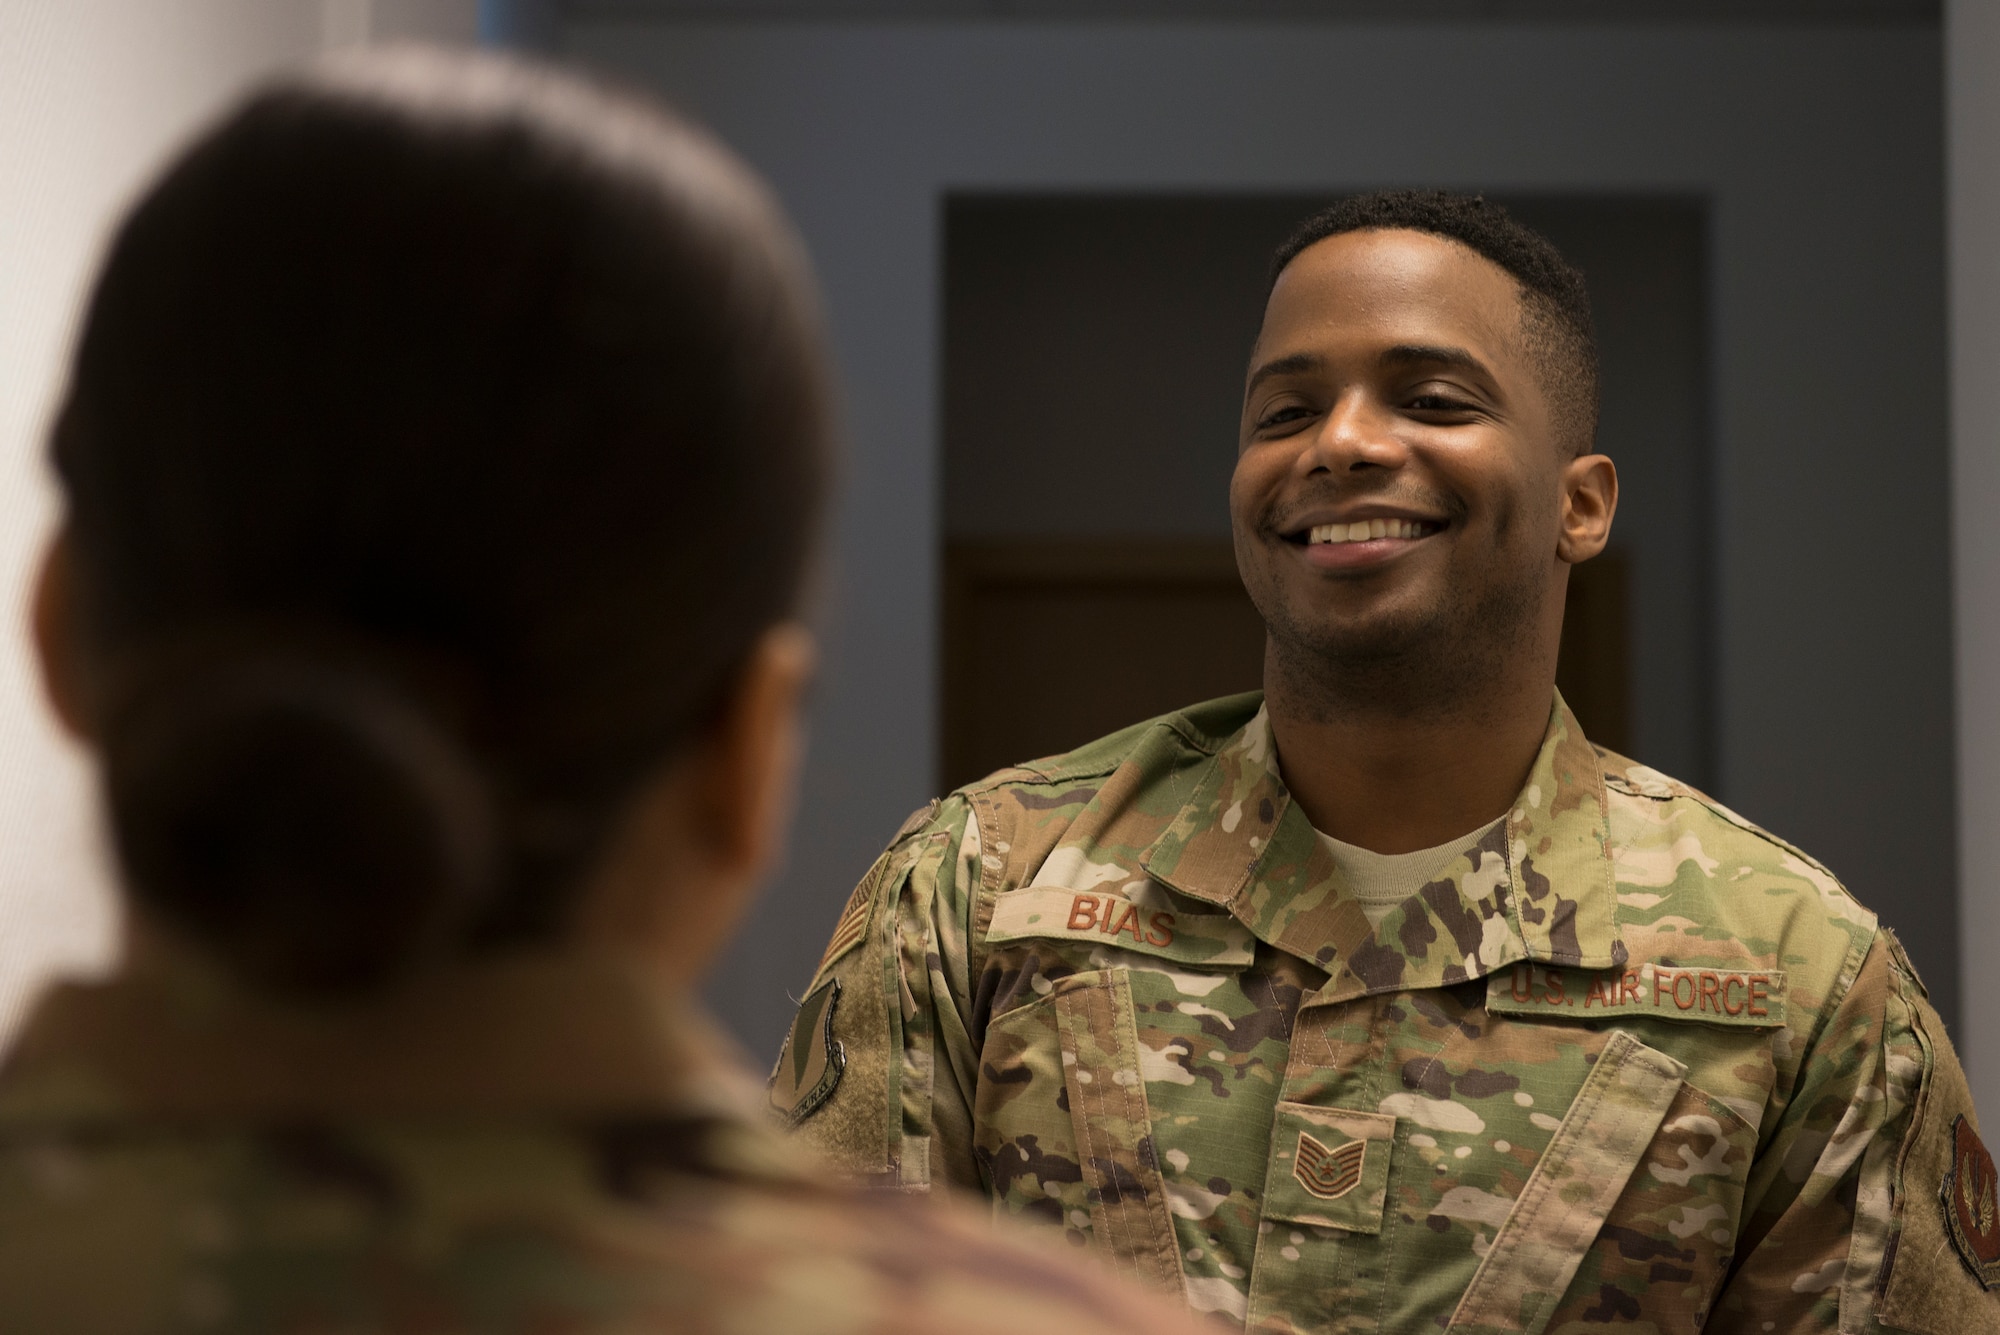 U.S. Air Force Tech. Sgt. Marcus Bias, 86th Airlift Wing equal opportunity specialist, speaks with a coworker at Ramstein Air Base, Germany, Feb. 6, 2020. The 86th AW Equal Opportunity office supports all active duty members, civilian employees and their family members across three wings including the 3rd Air Force, NATO and United States Air Forces in Europe, with enhancing cooperation in the workplace and advancing professional growth.